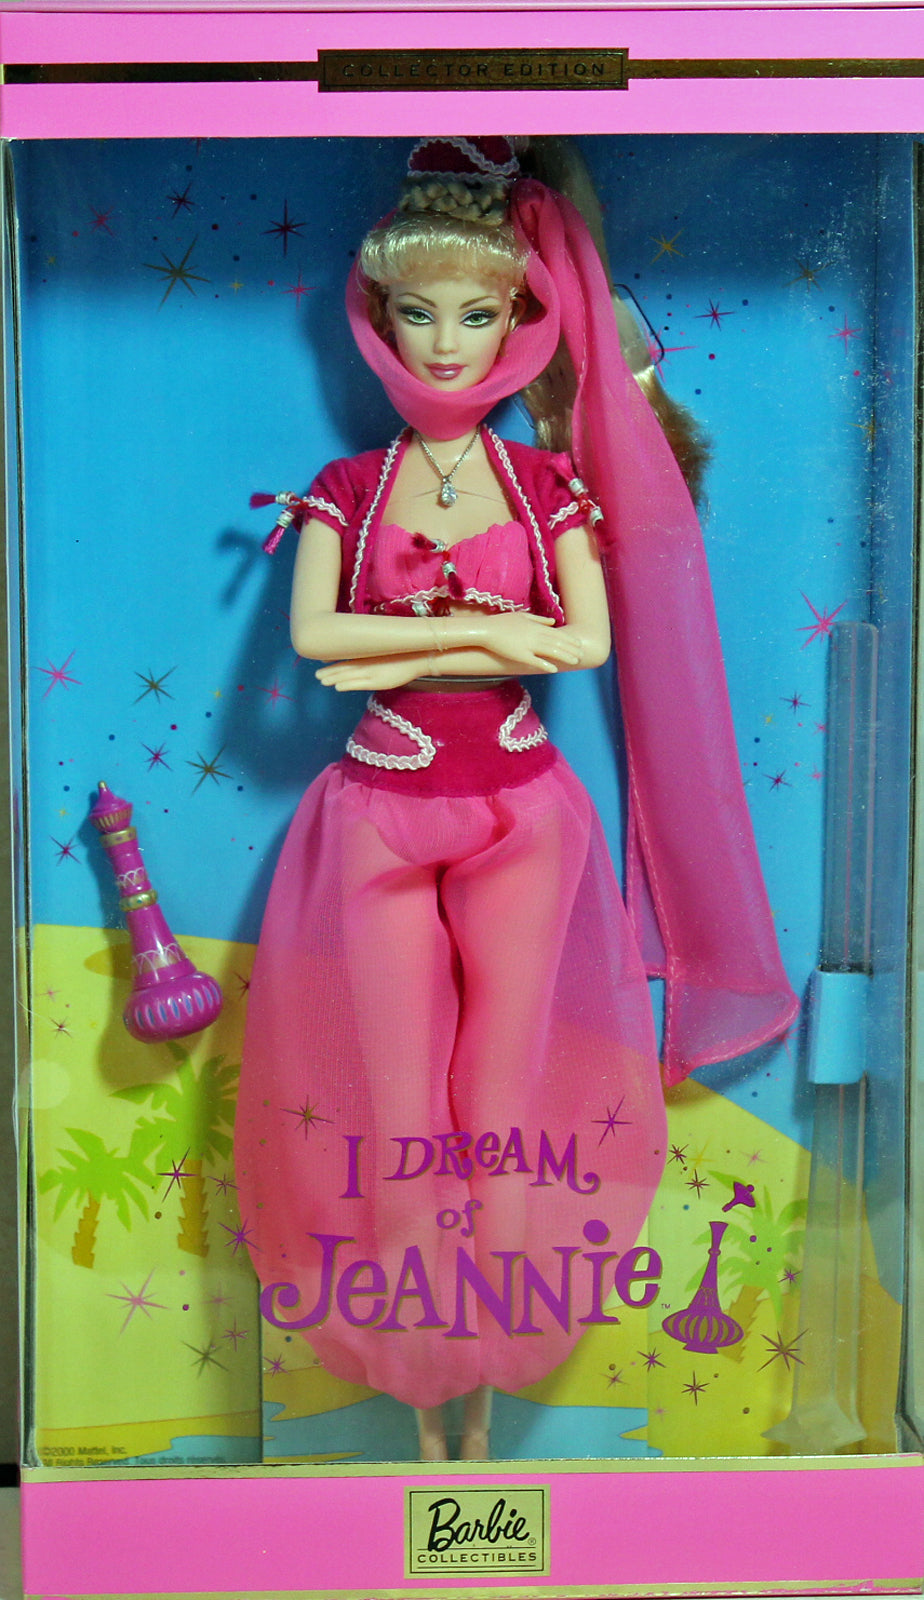 Barbie 29913 MIB 2000 Collector Edition I Dream of Jeannie Doll